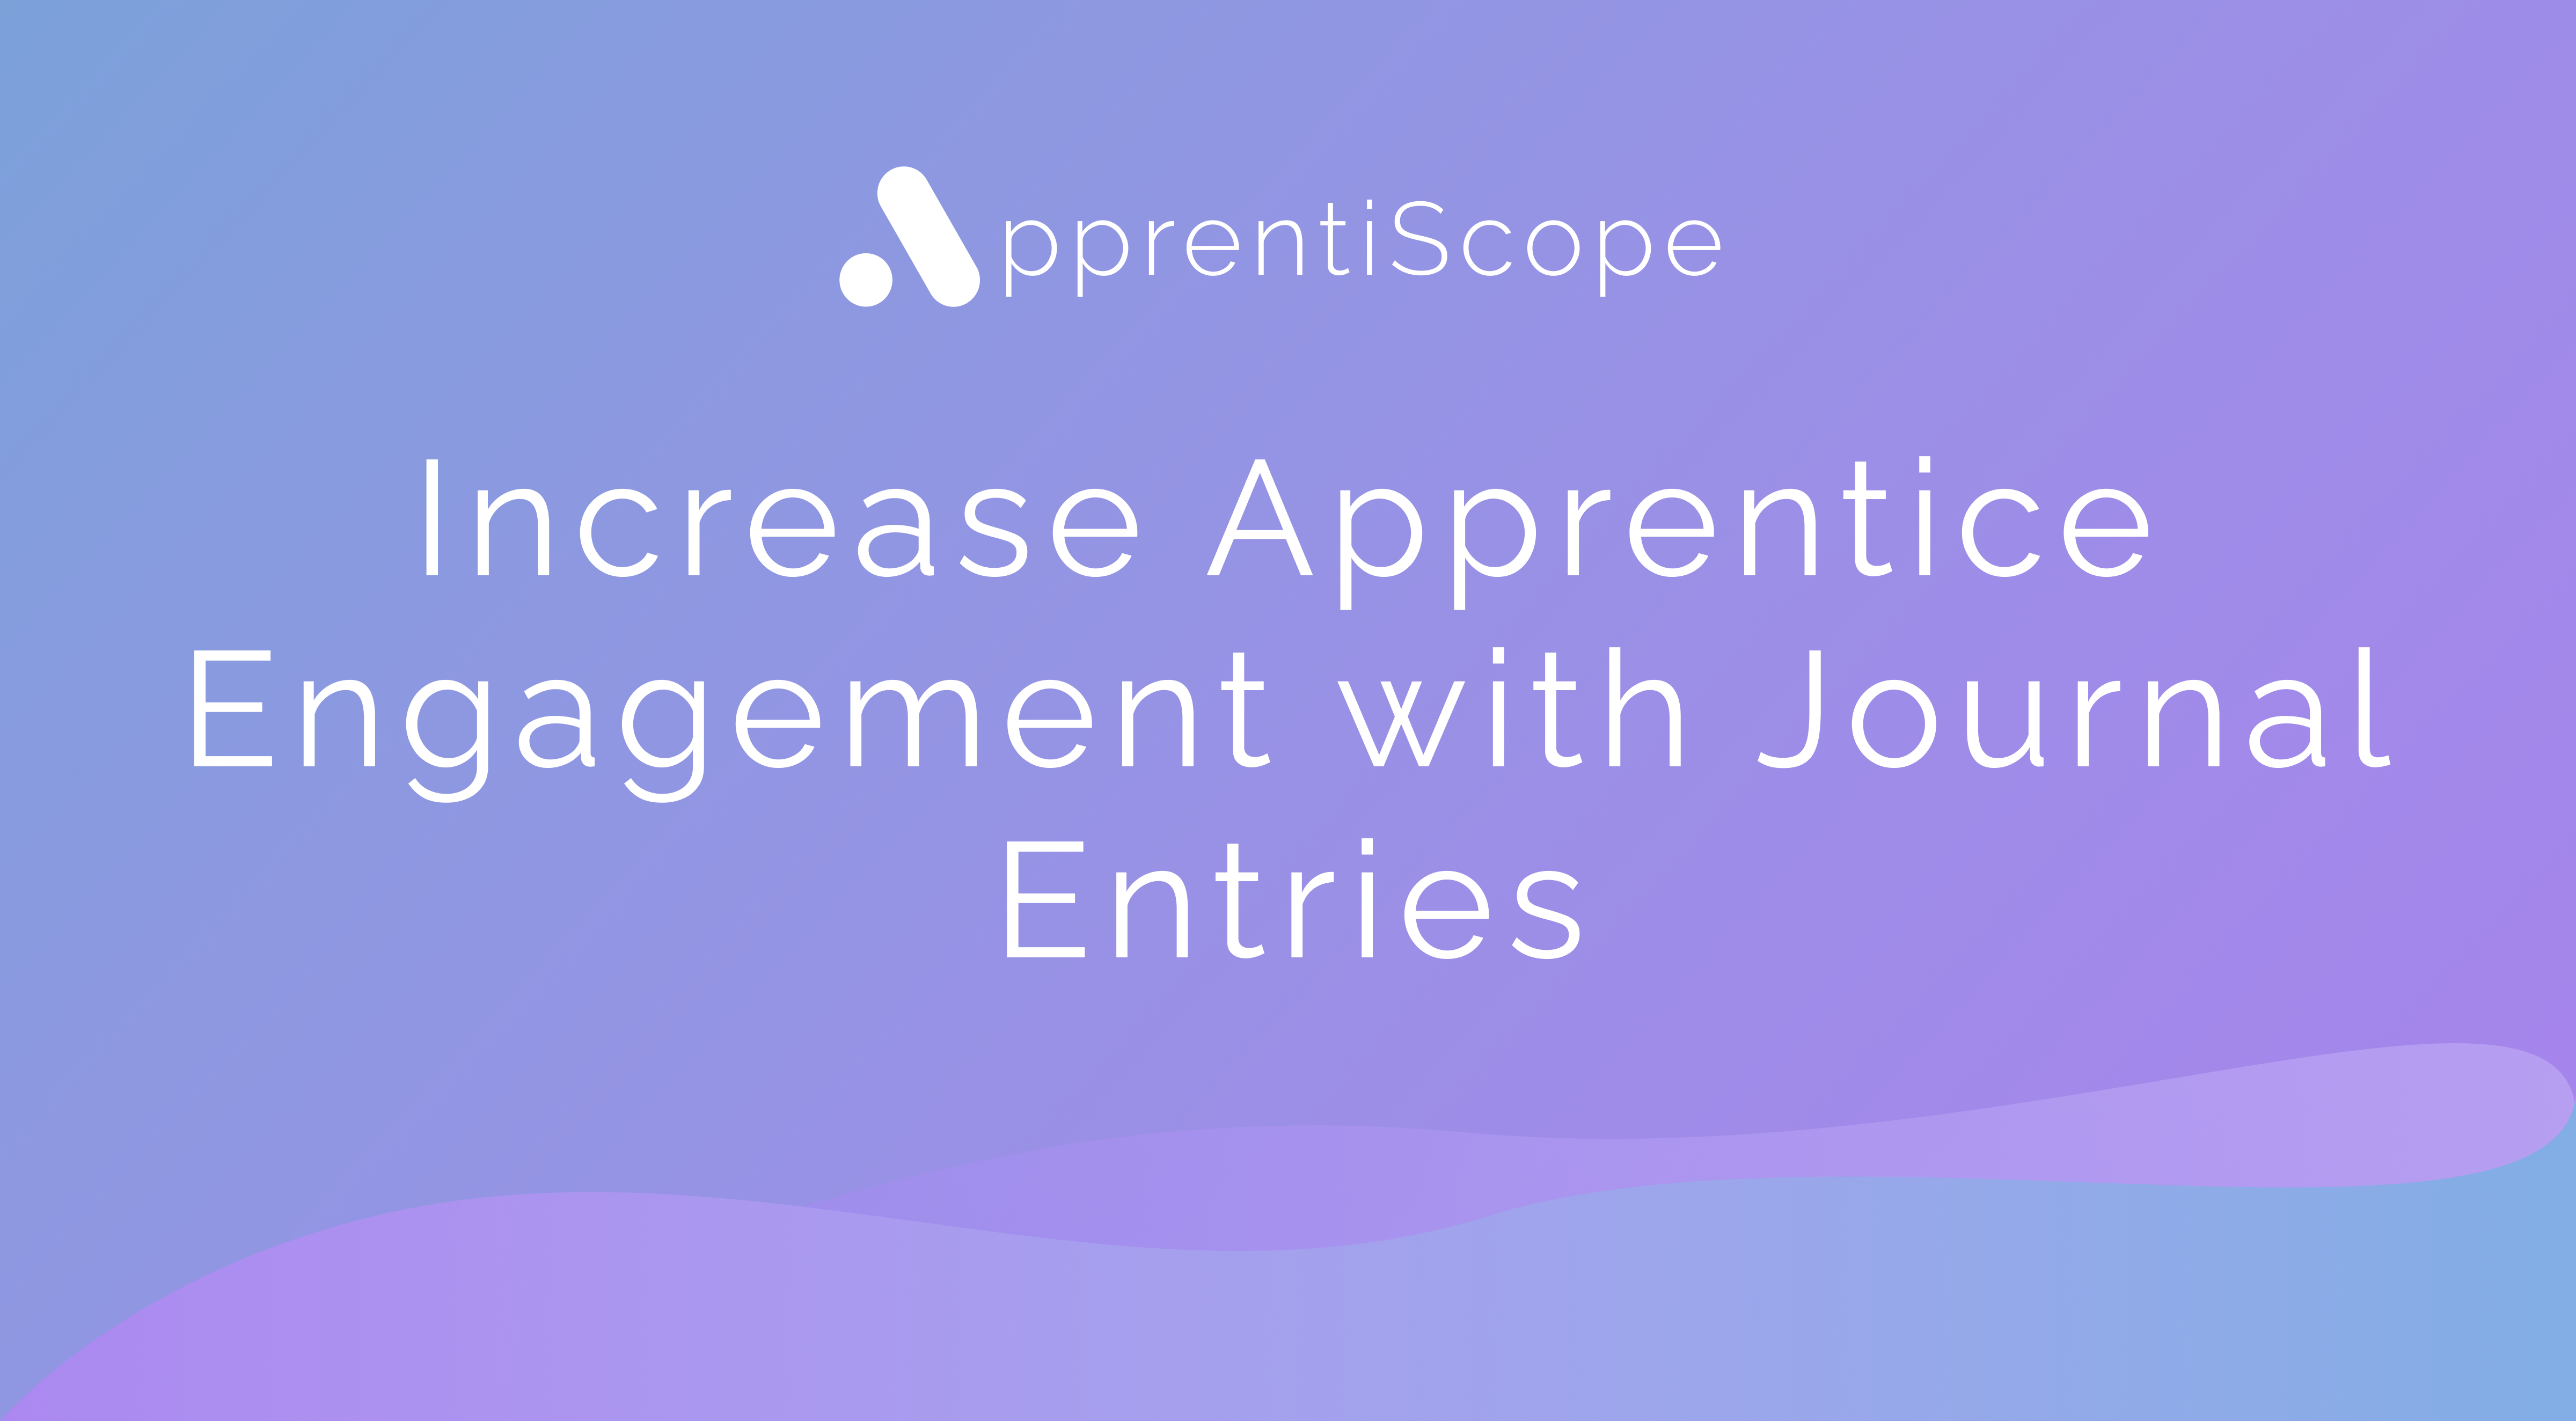 Increase Apprentice Engagement with Journal Entries